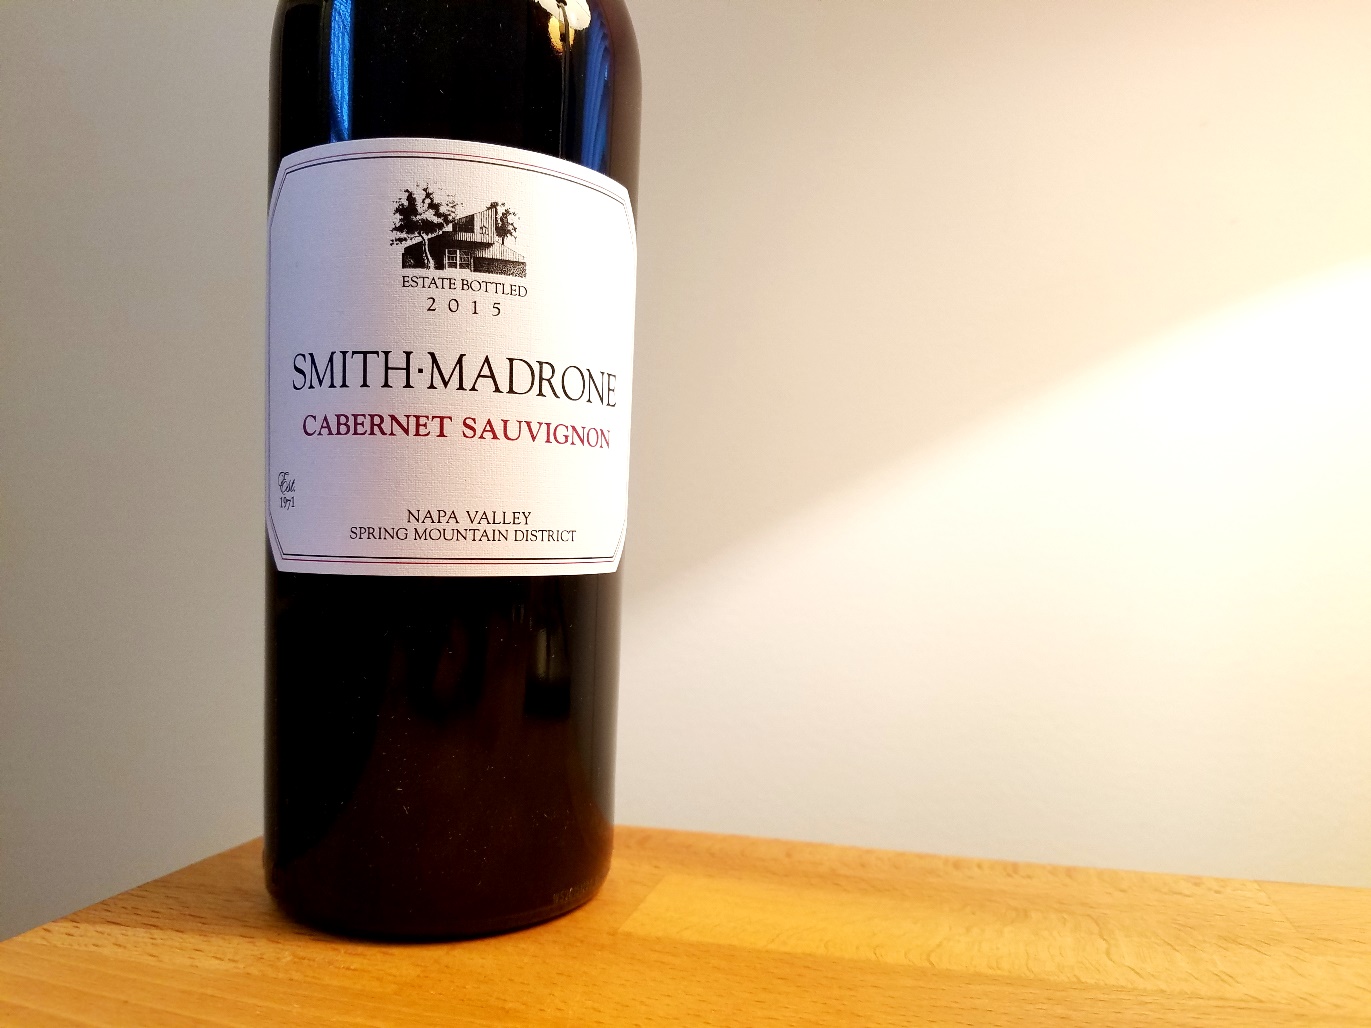 Smith-Madrone Vineyards and Winery, Cabernet Sauvignon 2015, Spring Mountain District, Napa Valley, California, Wine Casual